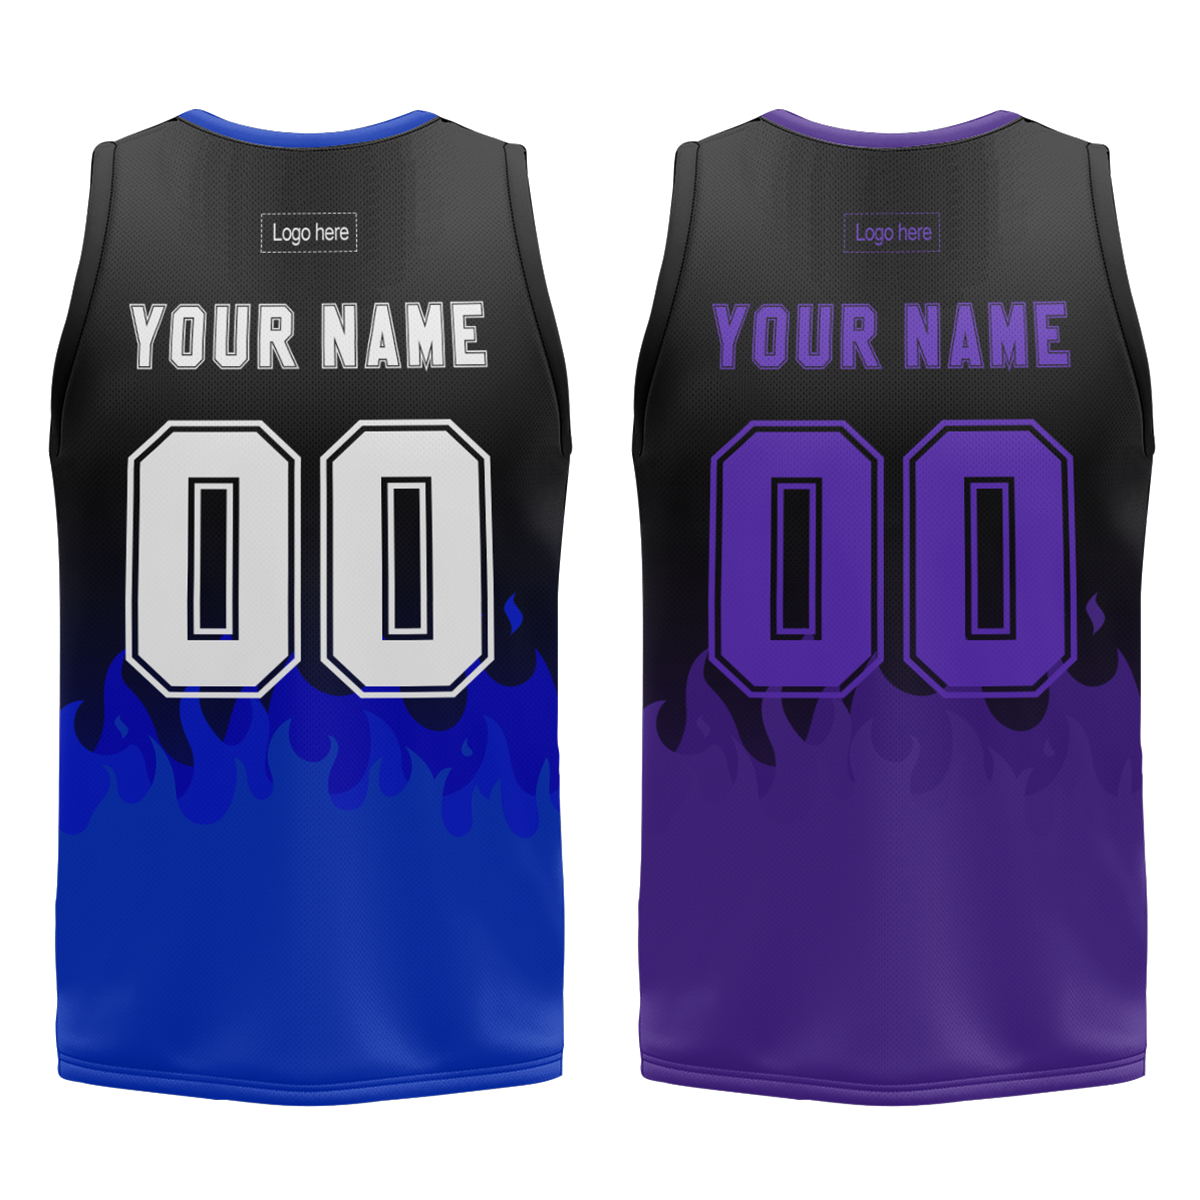 wholesales-reversible-basketball-jersey-custom-personalized-print-your-name-number-basketball-team-uniform-shirts-for-adult-at-cj-pod-6